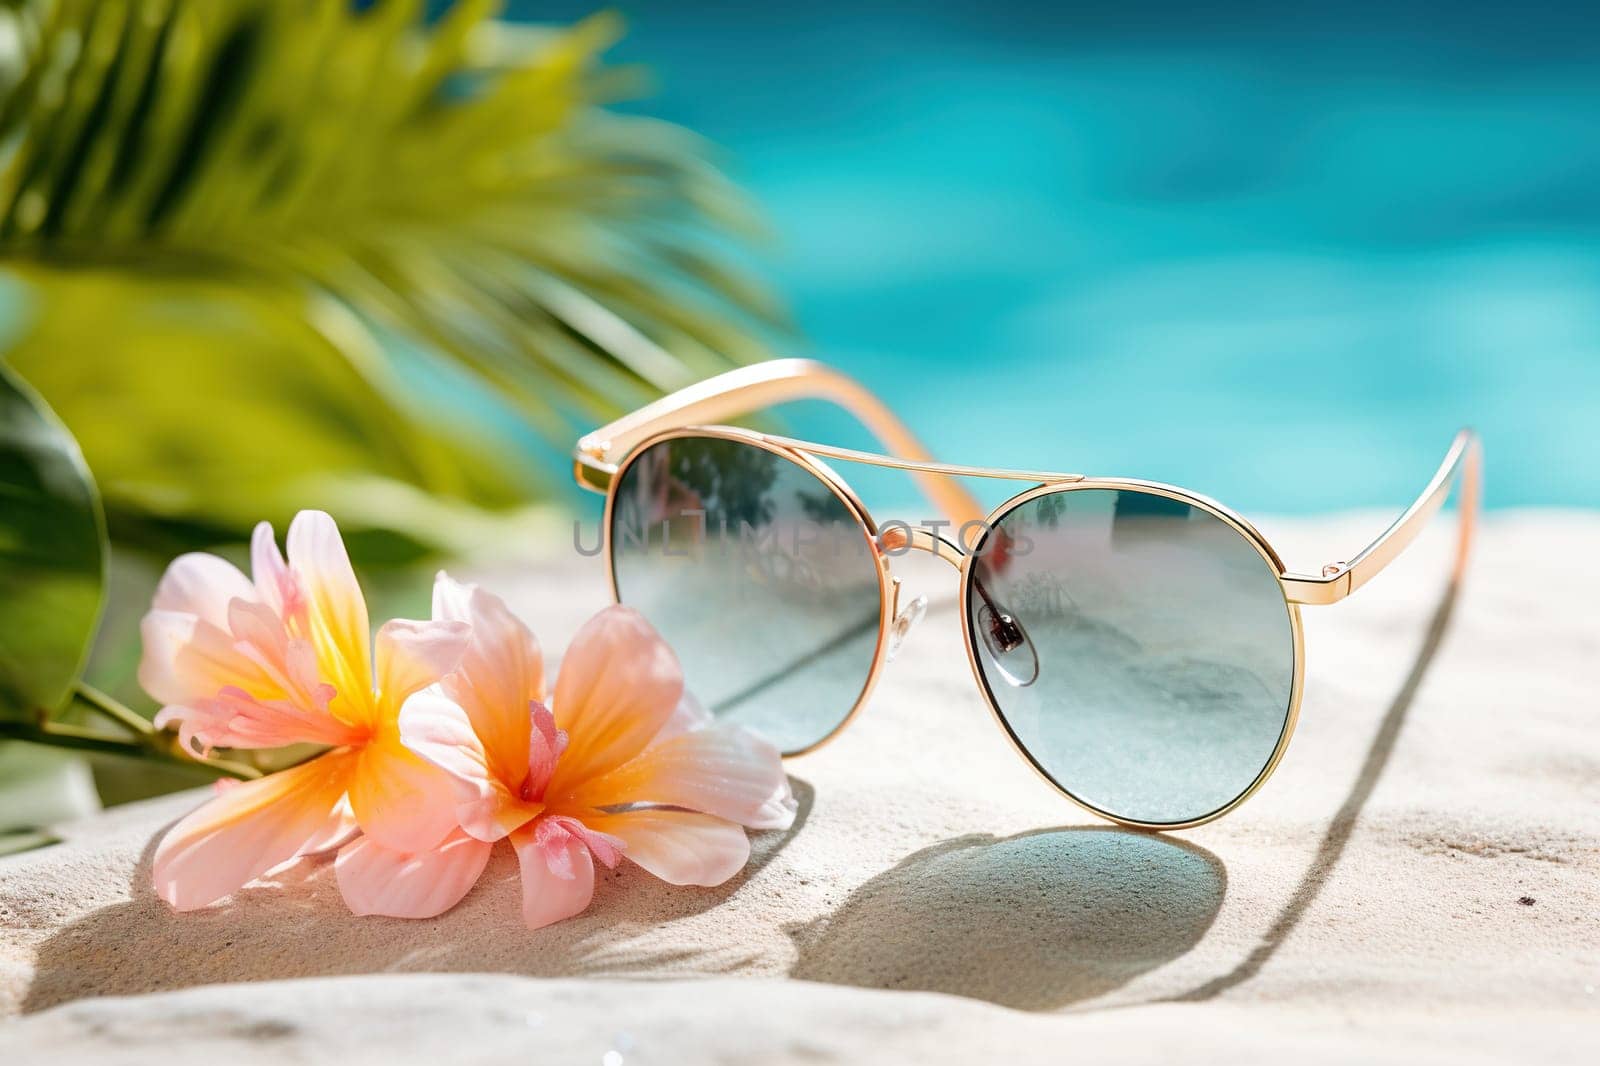 Sunglasses on the sand with flowers against a background of blue water and palm leaves. Resort vacation concept. Generated by artificial intelligence by Vovmar